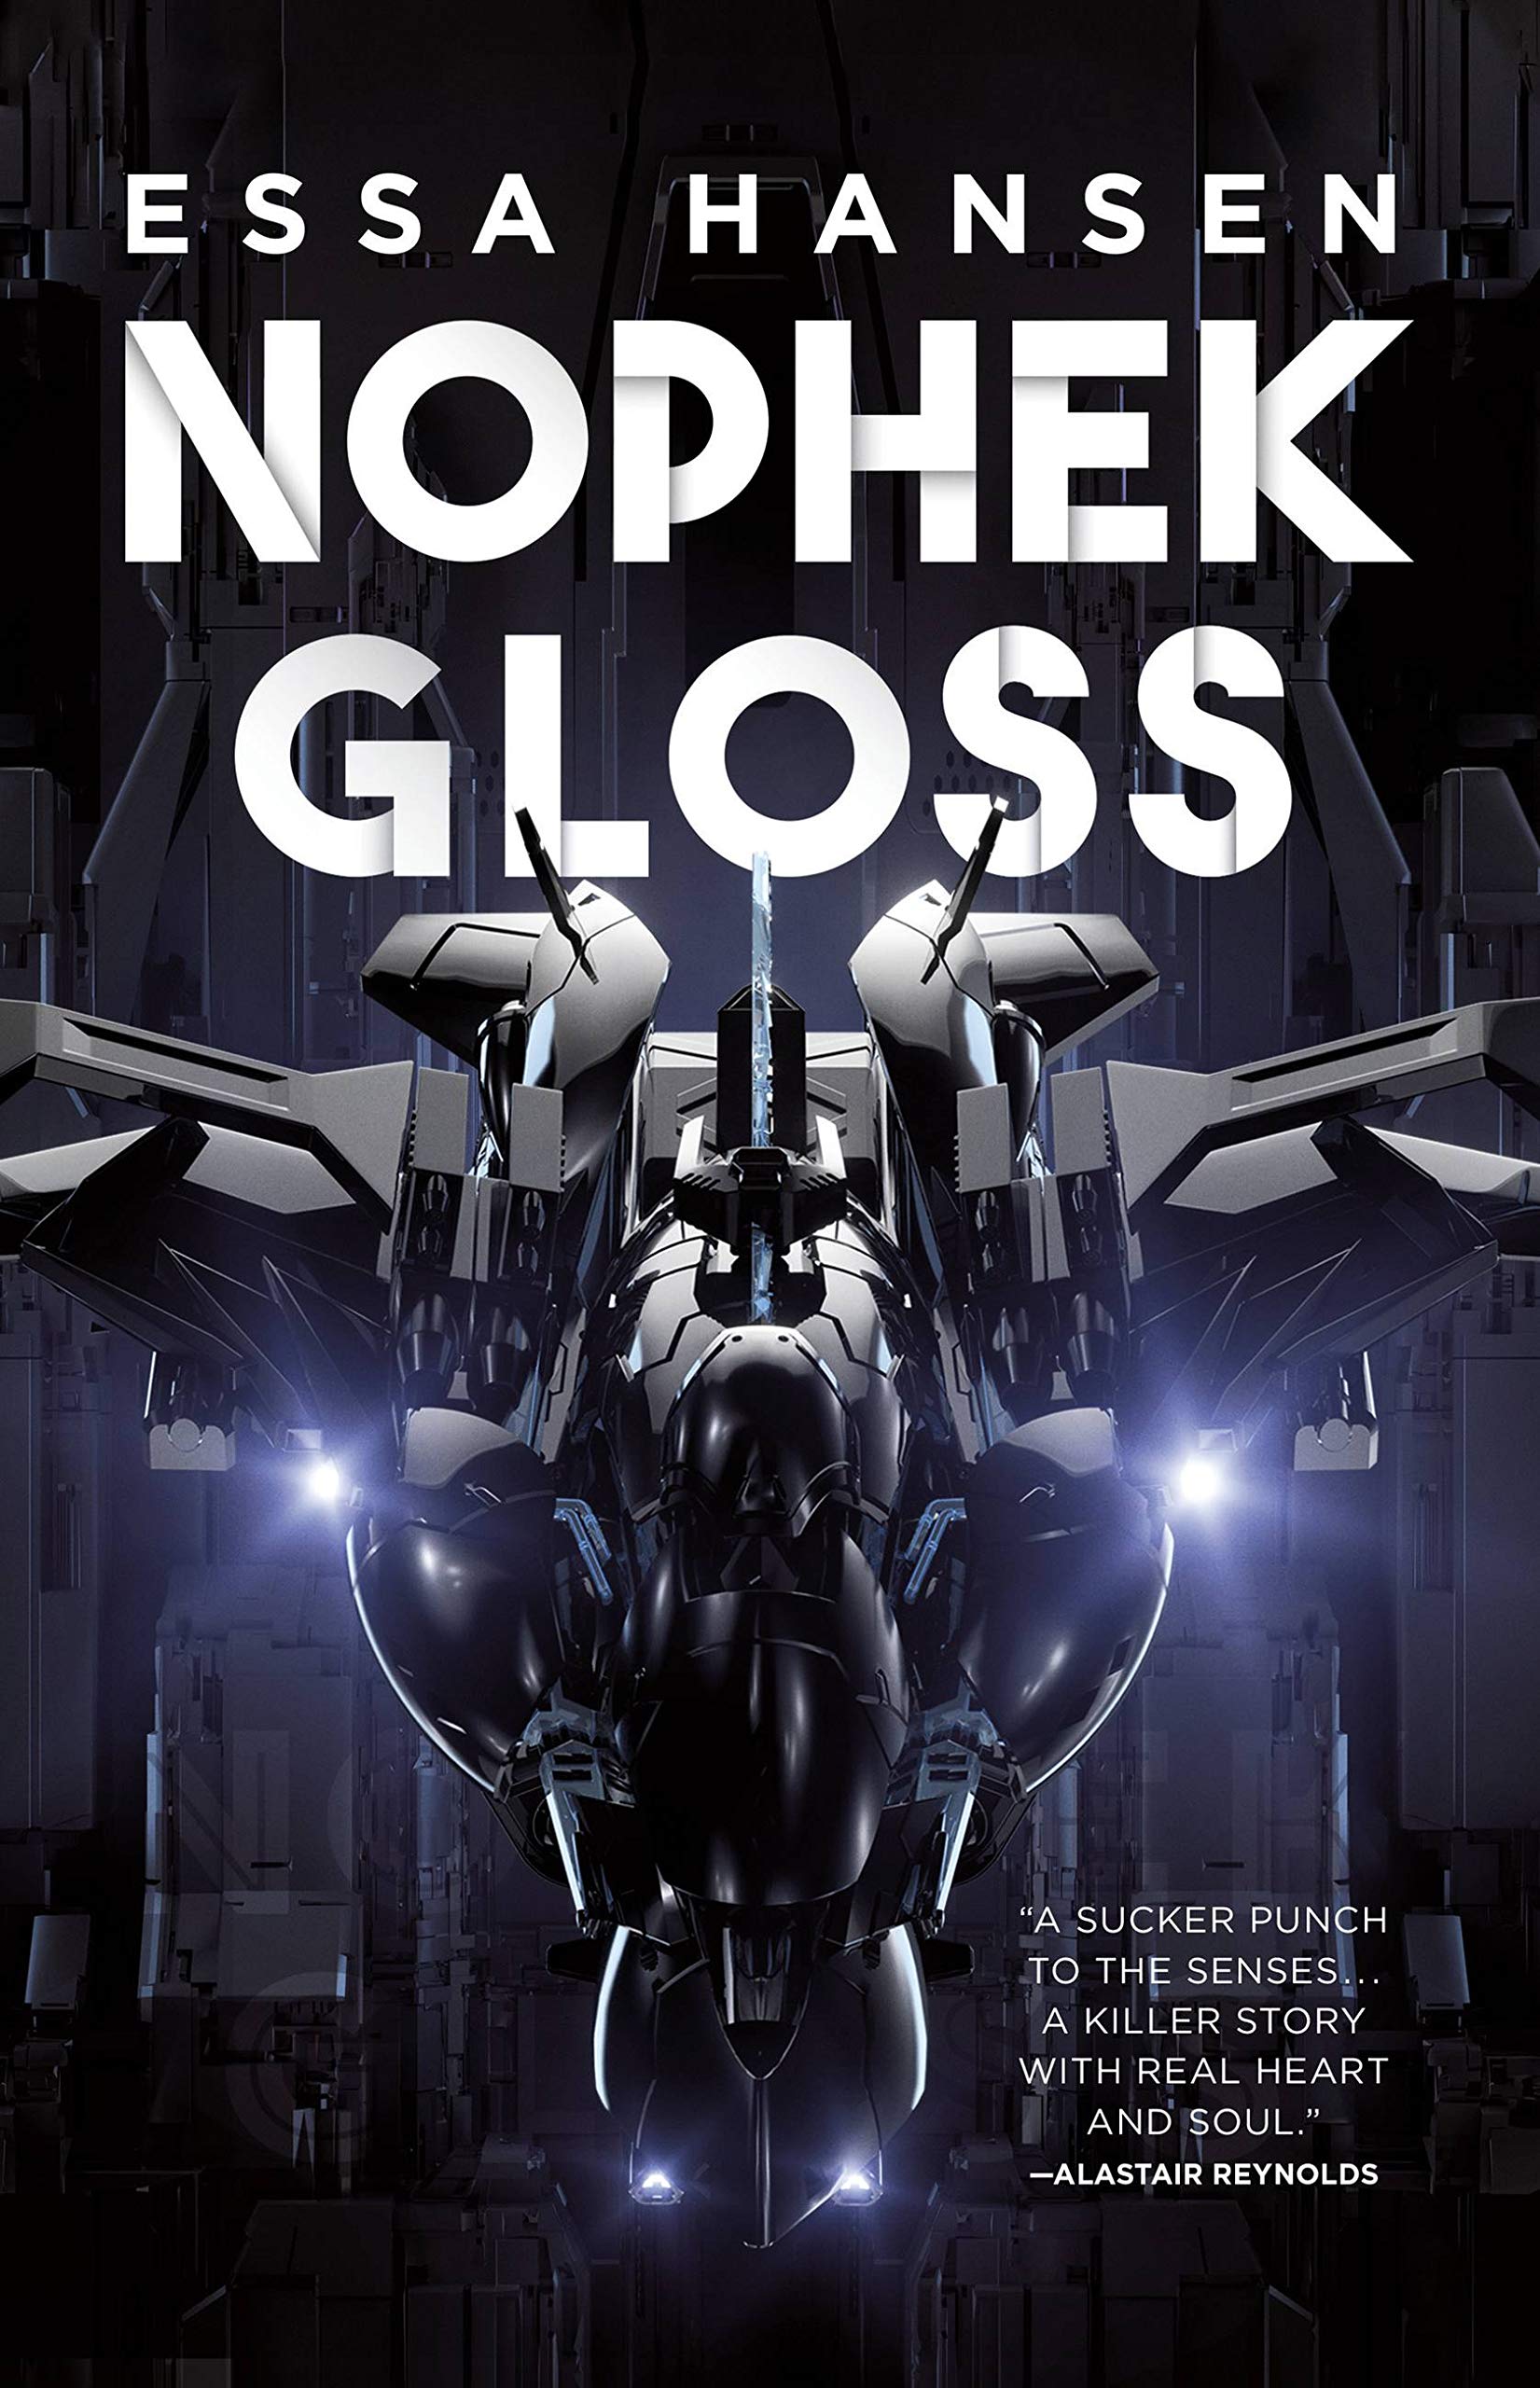 Nophek Gloss by Essa Hansen cover: A sleek black spaceship, dark background with outlines of something that might be buildings or other spaceships. Quote by Alastair Reynolds: "A sucker punch to the senses. A killer story with real heart and soul."